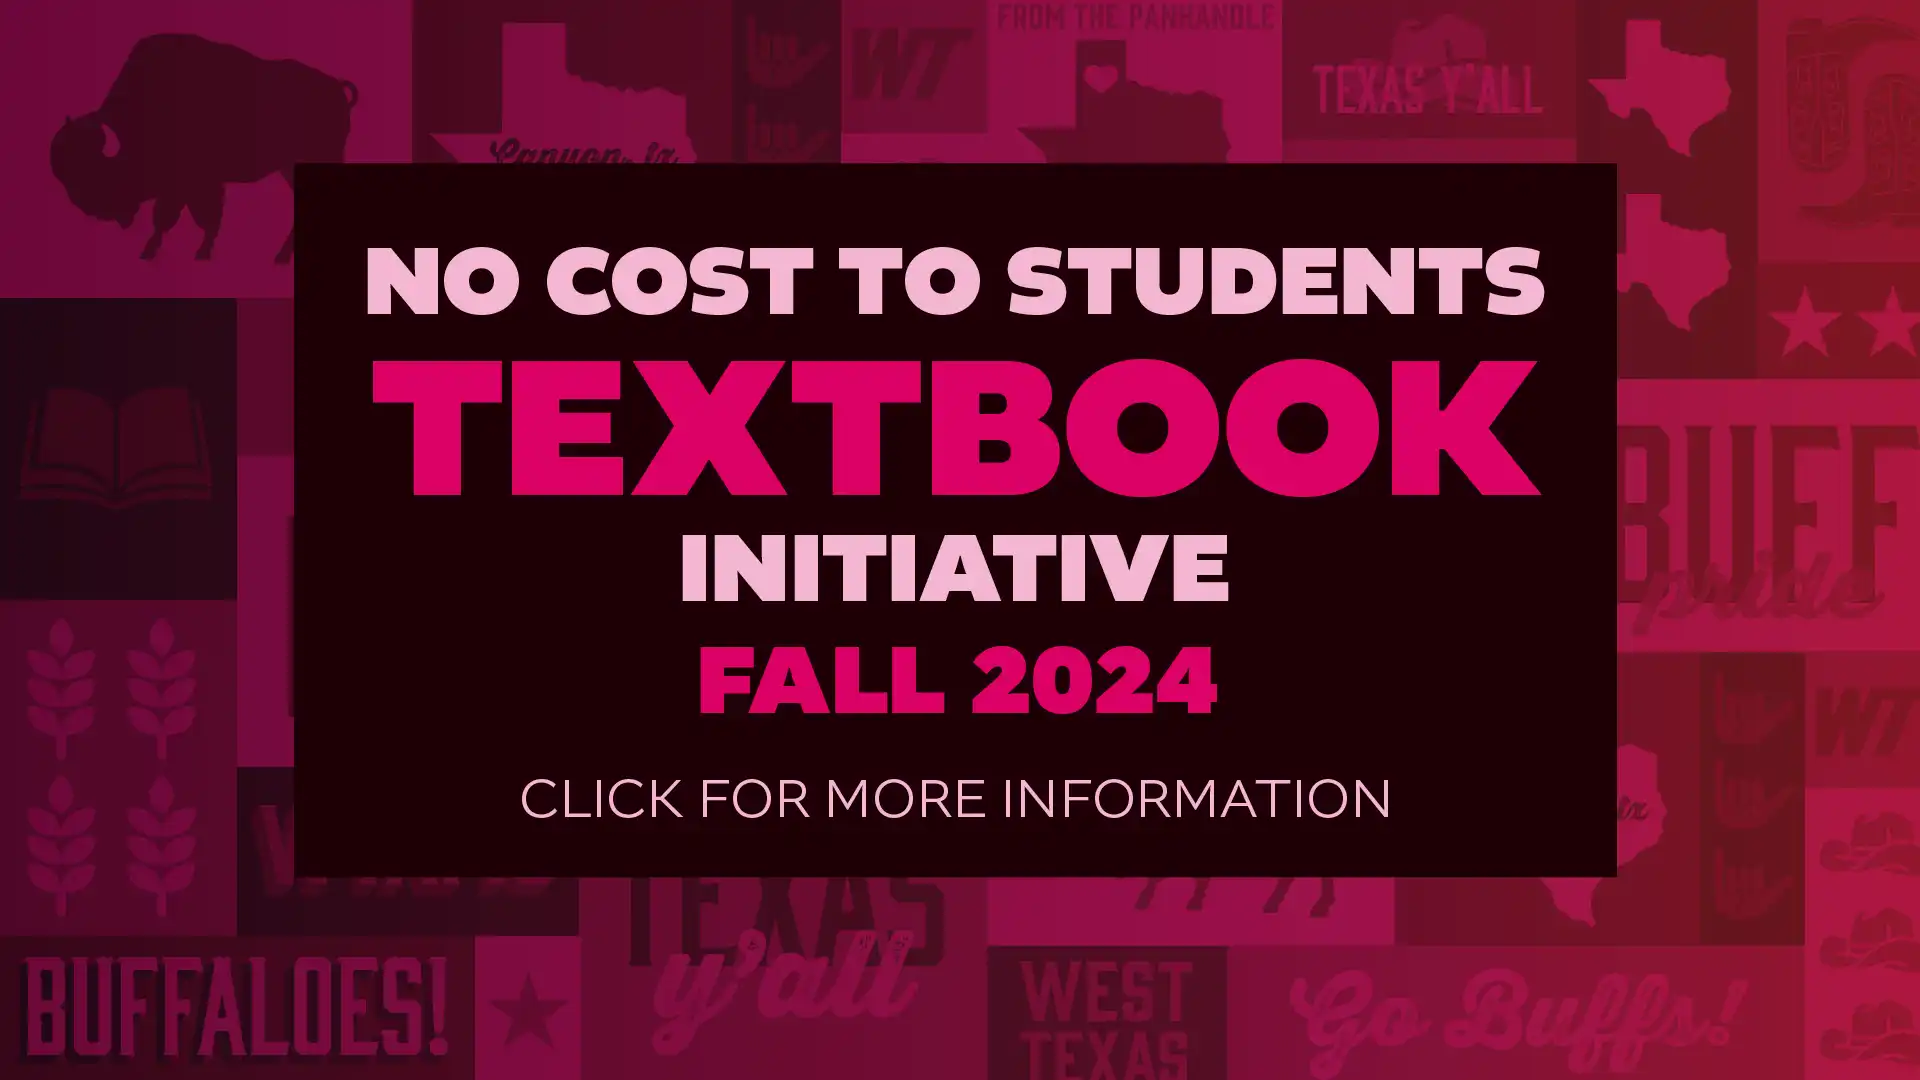 No Cost to Students Textbook Initiative